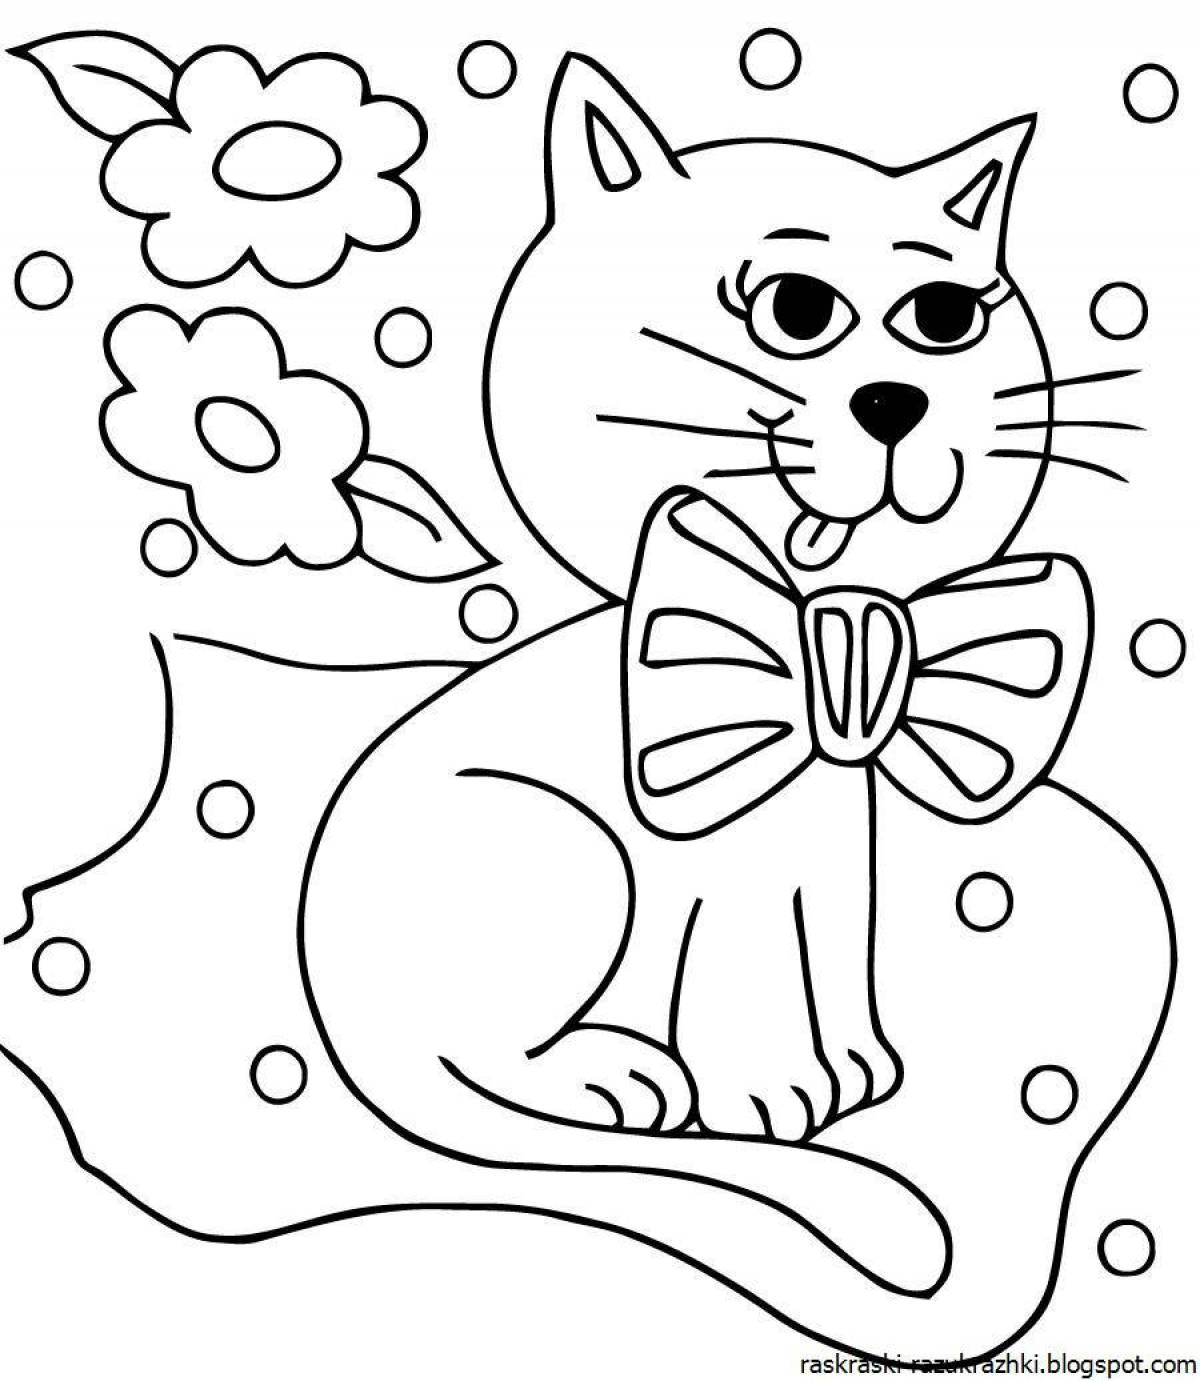 Fluffy cat coloring pages for kids